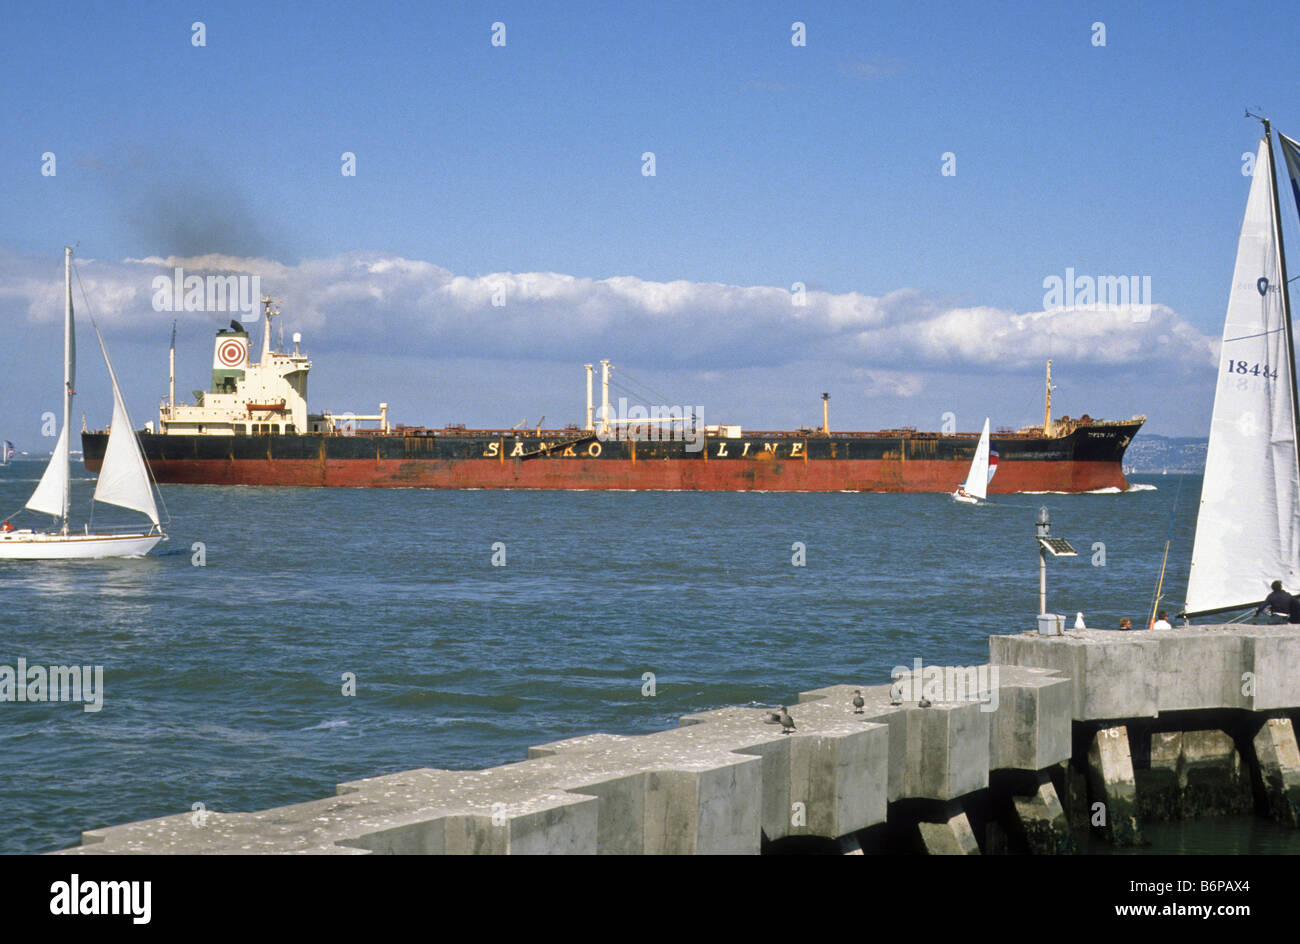 Oil tanker ship glides past recreational sailboats in San Francisco Harbor. Stock Photo